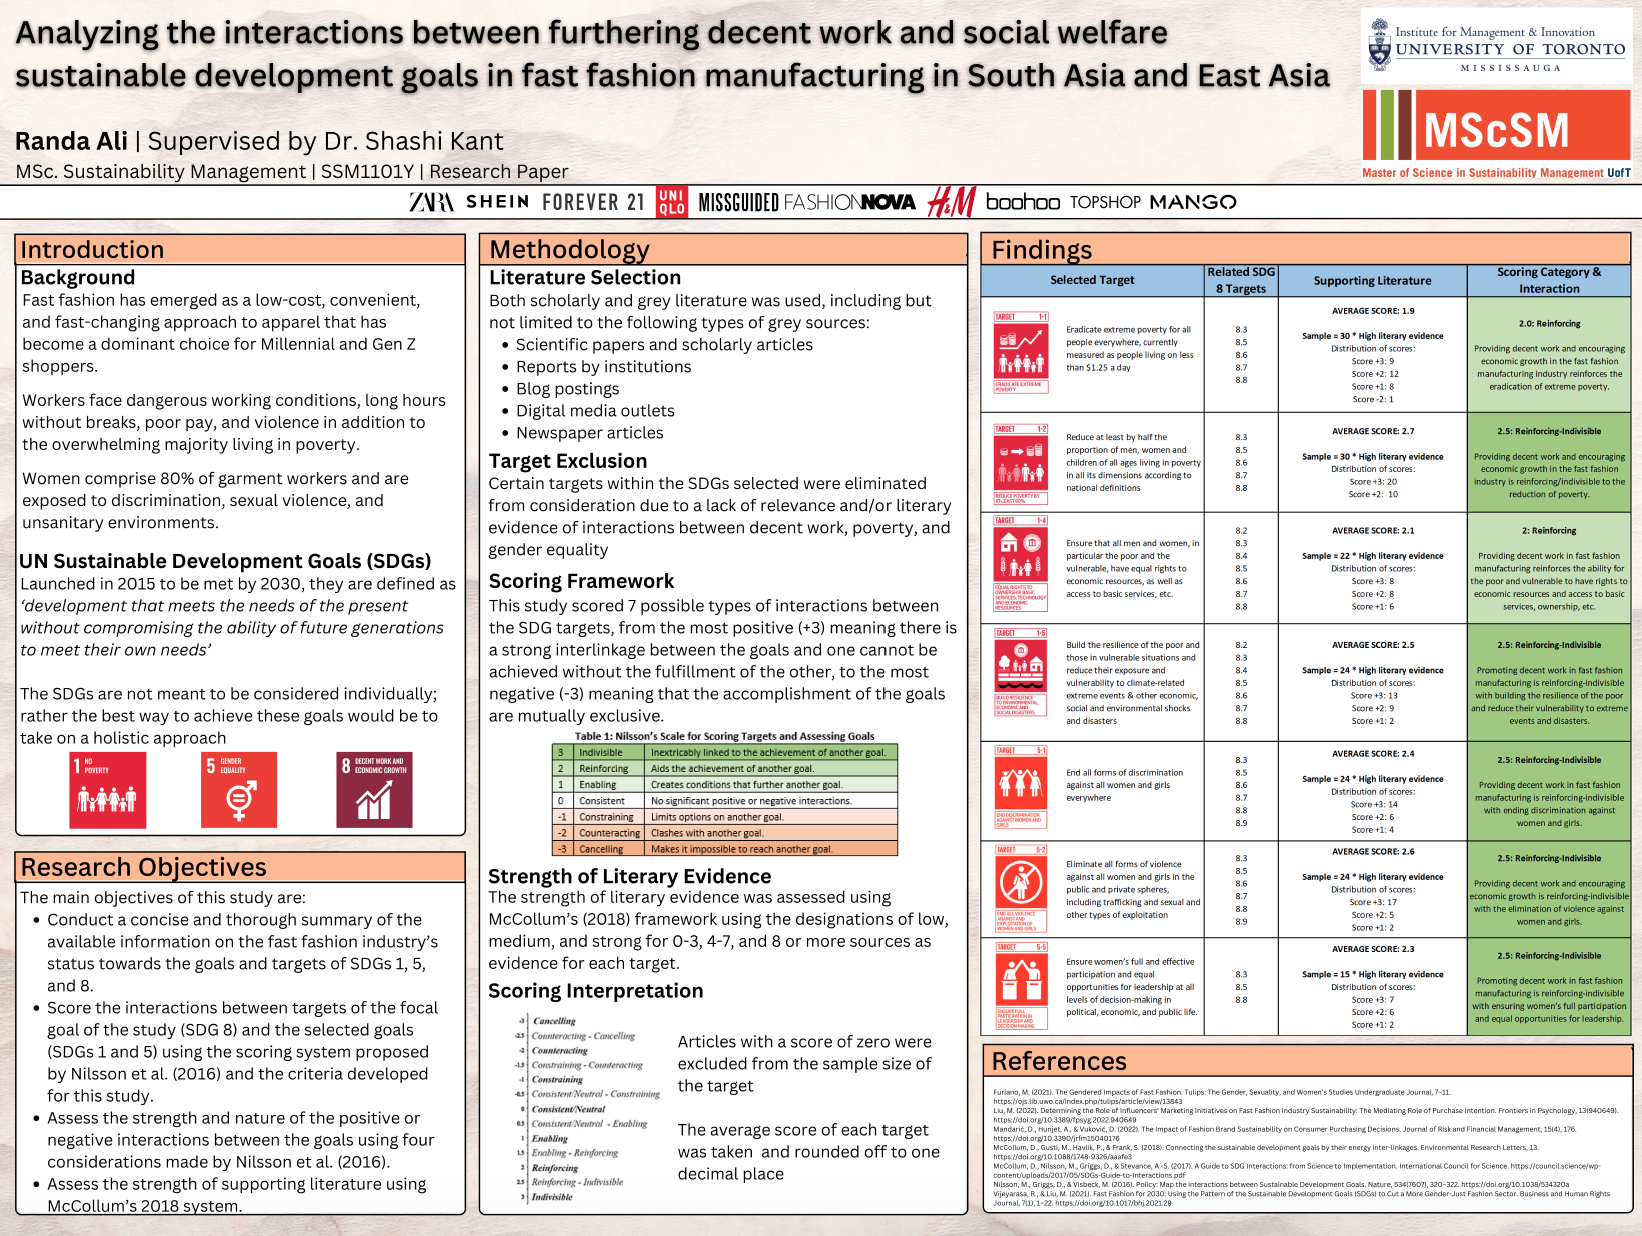 Showcase Image for Analyzing the interactions between furthering decent work and social welfare sustainable development goals in fast fashion manufacturing in South Asia and East Asia